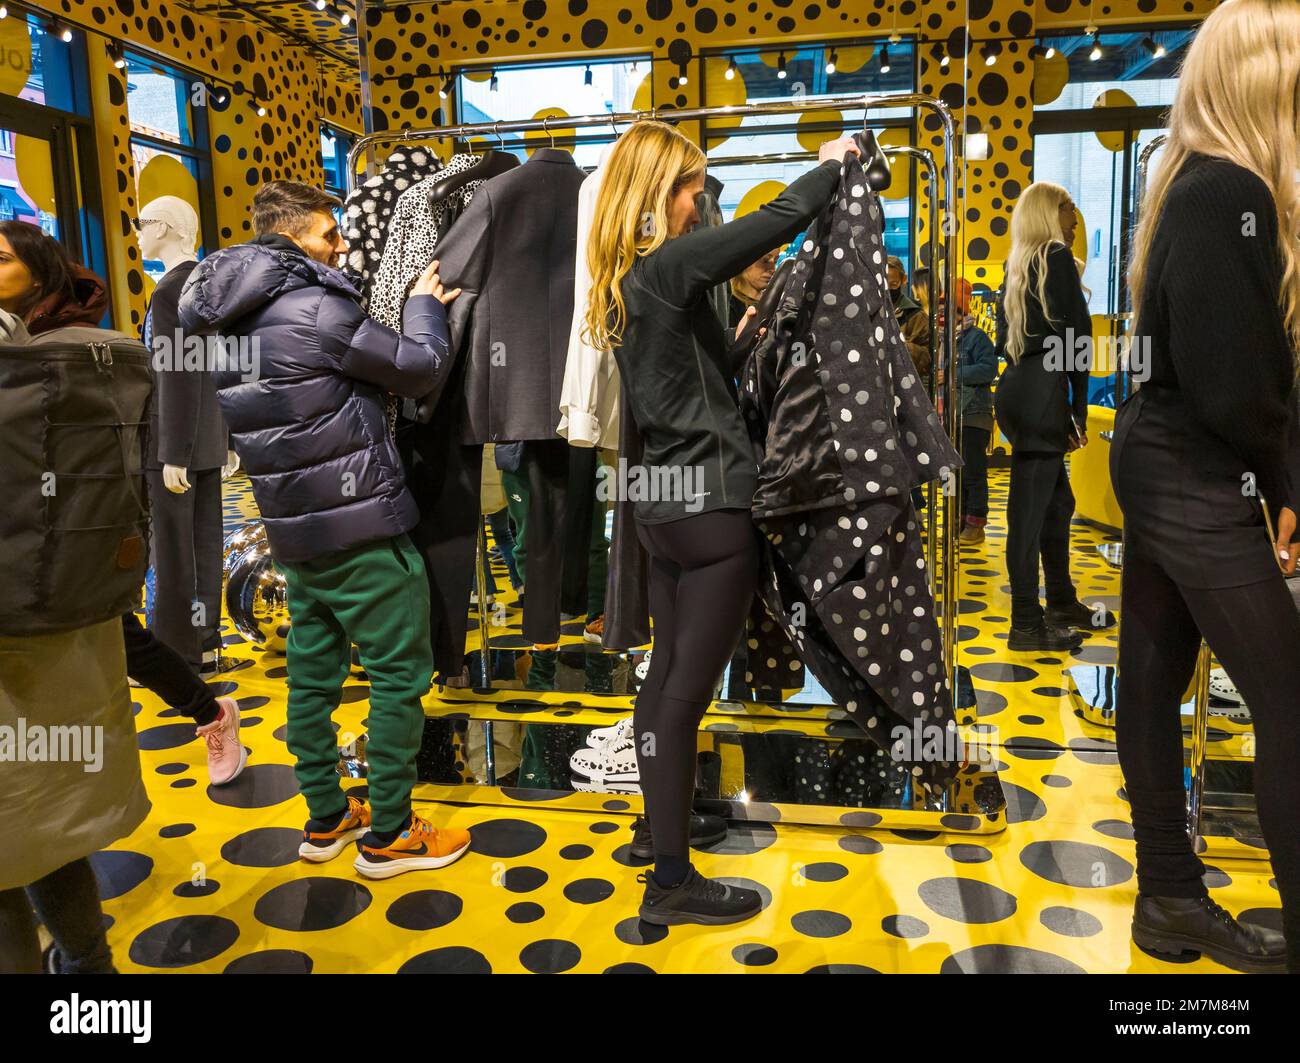 Crowds flock to the Louis Vuitton store in the Meatpacking District in New York on Saturday, January 7, 2023 to browse and buy clothing and accessories from the Yayoi Kusama collaboration with the brand.  (© Richard B. Levine) Stock Photo